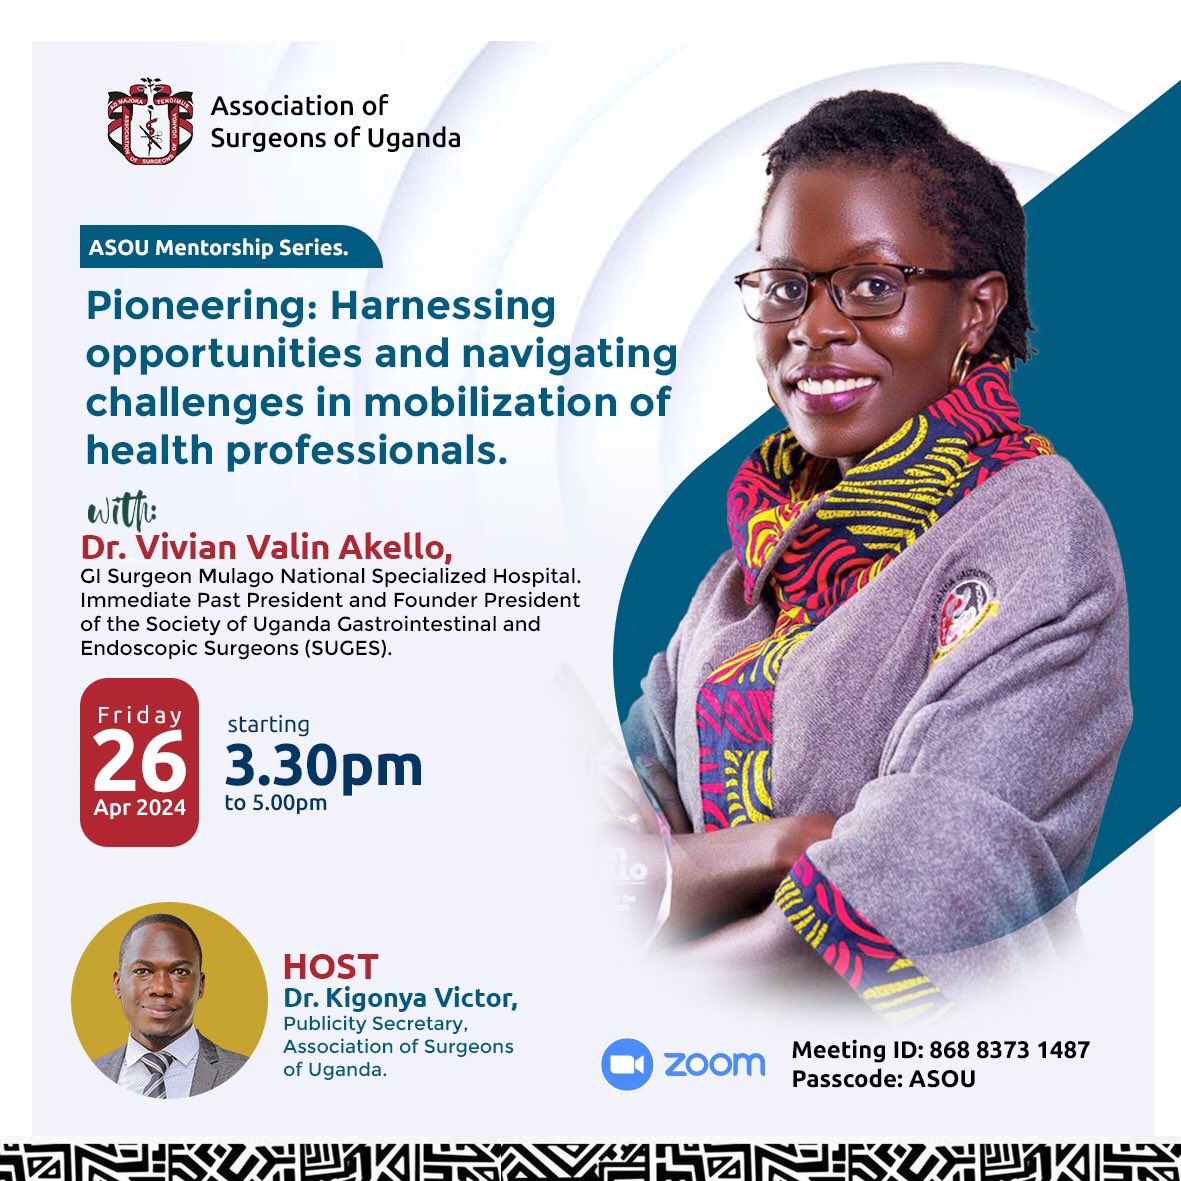 @ASOU_Official invites you to the 25th ASOU Mentorship Session featuring Dr. @vivian_akello, Founder President @sugesofficial sharing her experience on the leadership of health professionals. 🗓 Friday 26th April 2024. ⏰ 3:30pm - 5:00pm EAT